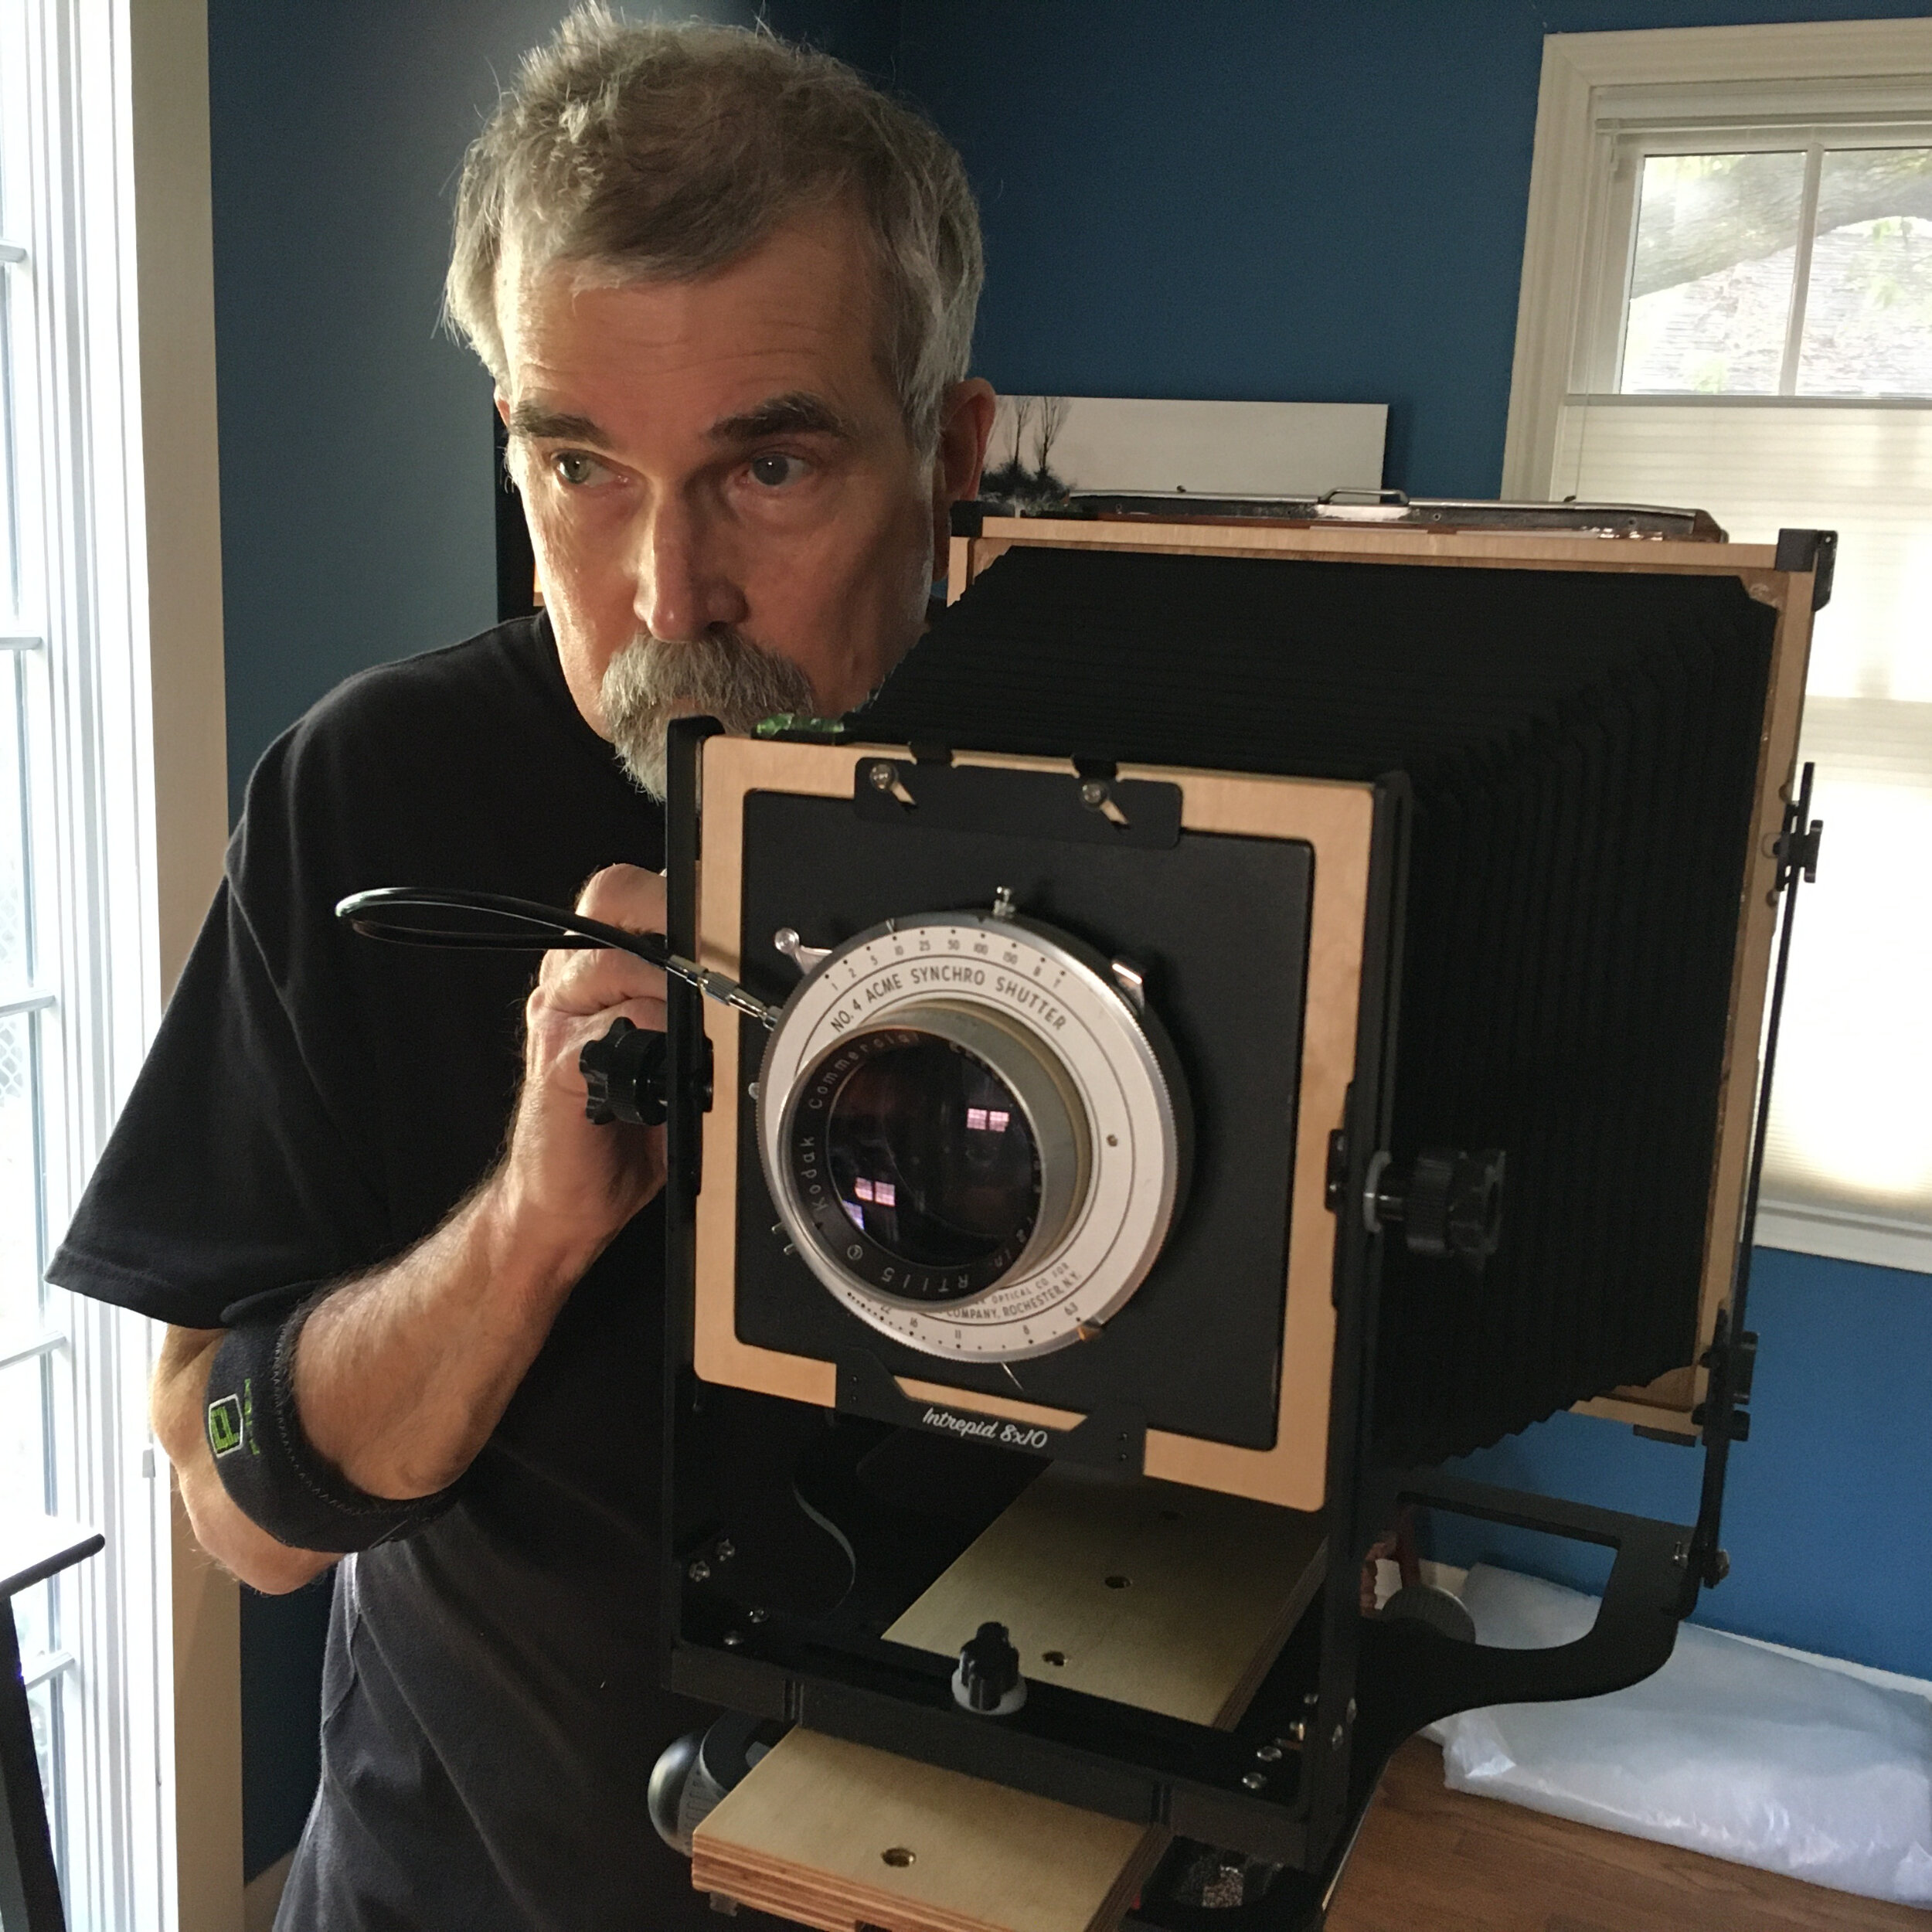 With the Intrepid 8X10 camera